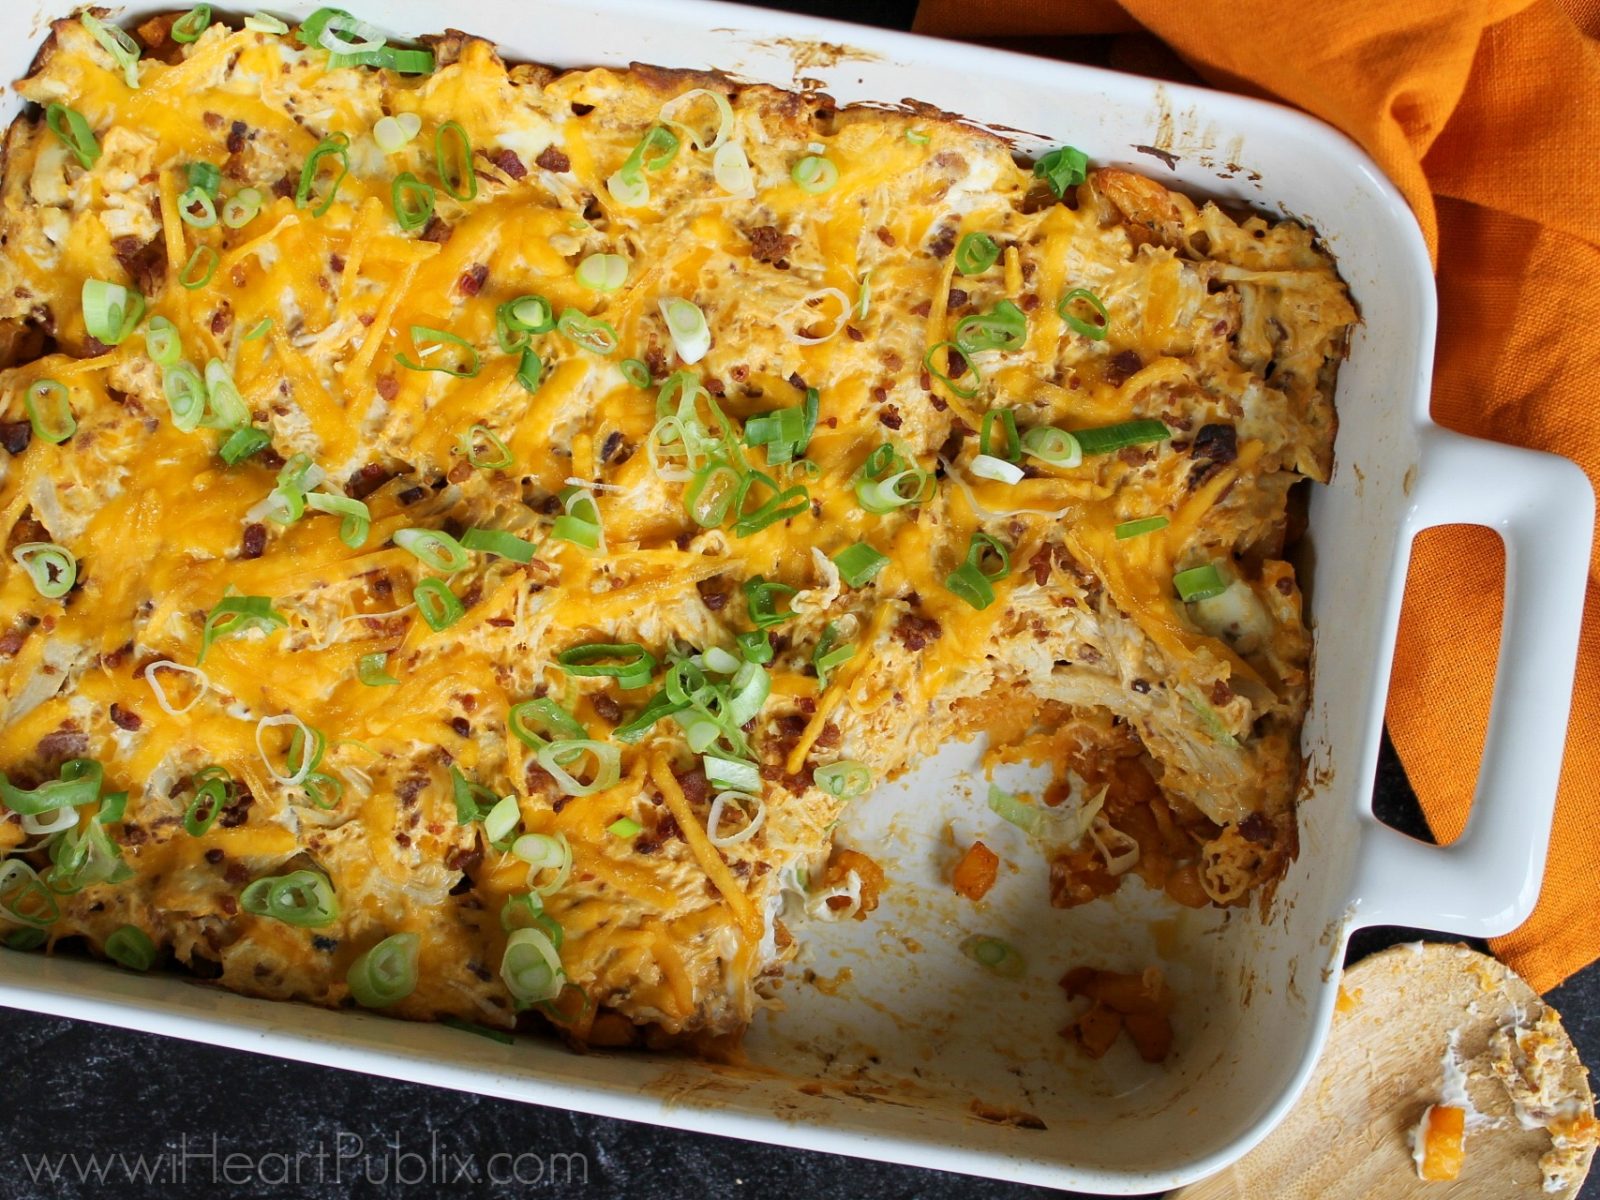 Buffalo Chicken & Potato Casserole – Super Meal To Go With The Deals At Publix